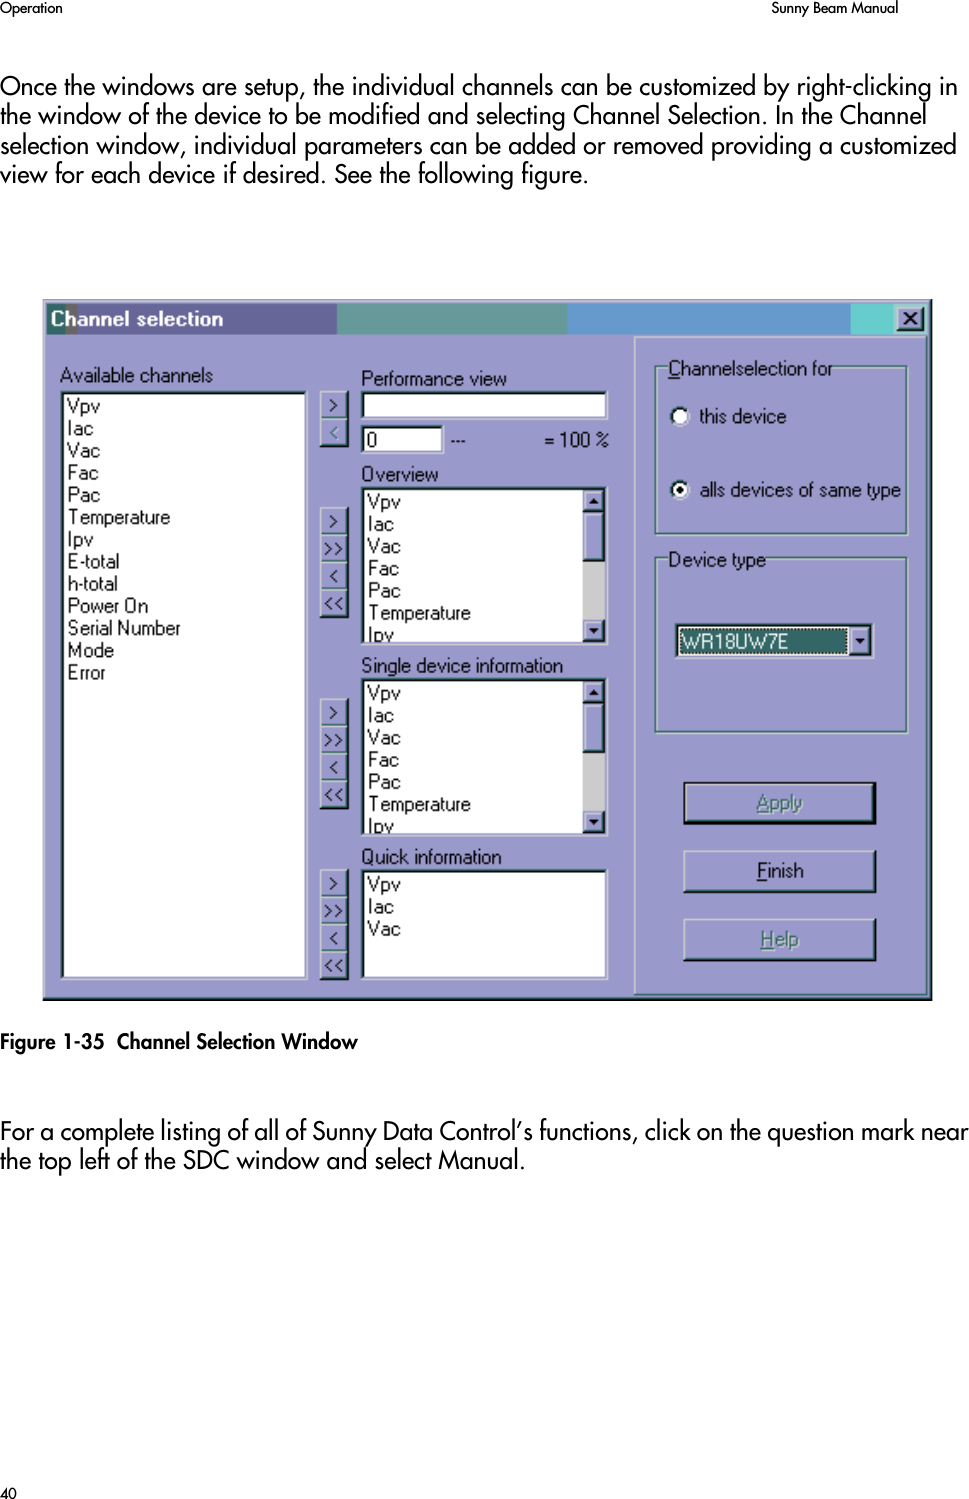 Operation    Sunny Beam Manual40Once the windows are setup, the individual channels can be customized by right-clicking in the window of the device to be modified and selecting Channel Selection. In the Channel selection window, individual parameters can be added or removed providing a customized view for each device if desired. See the following figure.Figure 1-35  Channel Selection WindowFor a complete listing of all of Sunny Data Control’s functions, click on the question mark near the top left of the SDC window and select Manual.